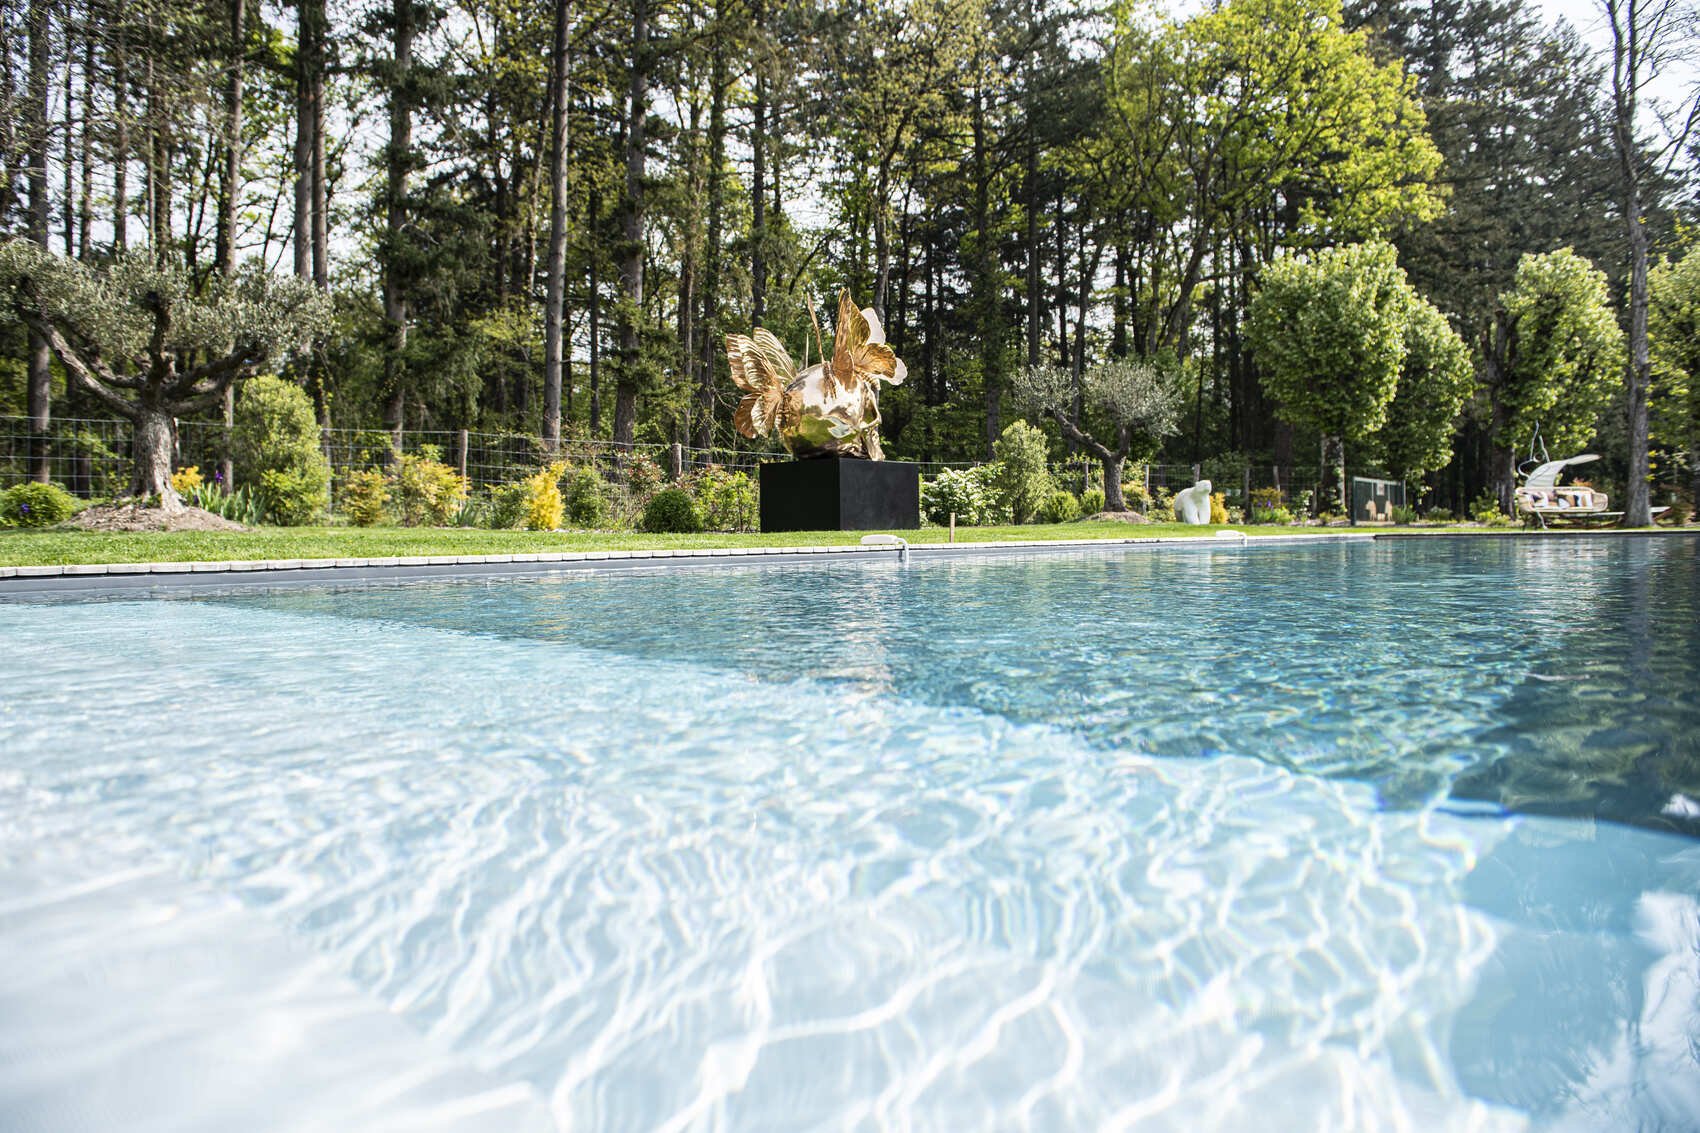 222/Loire_Valley_Lodges/Loire_Valley_Lodges_TemptingPlaces_swimming_pool_2.jpg